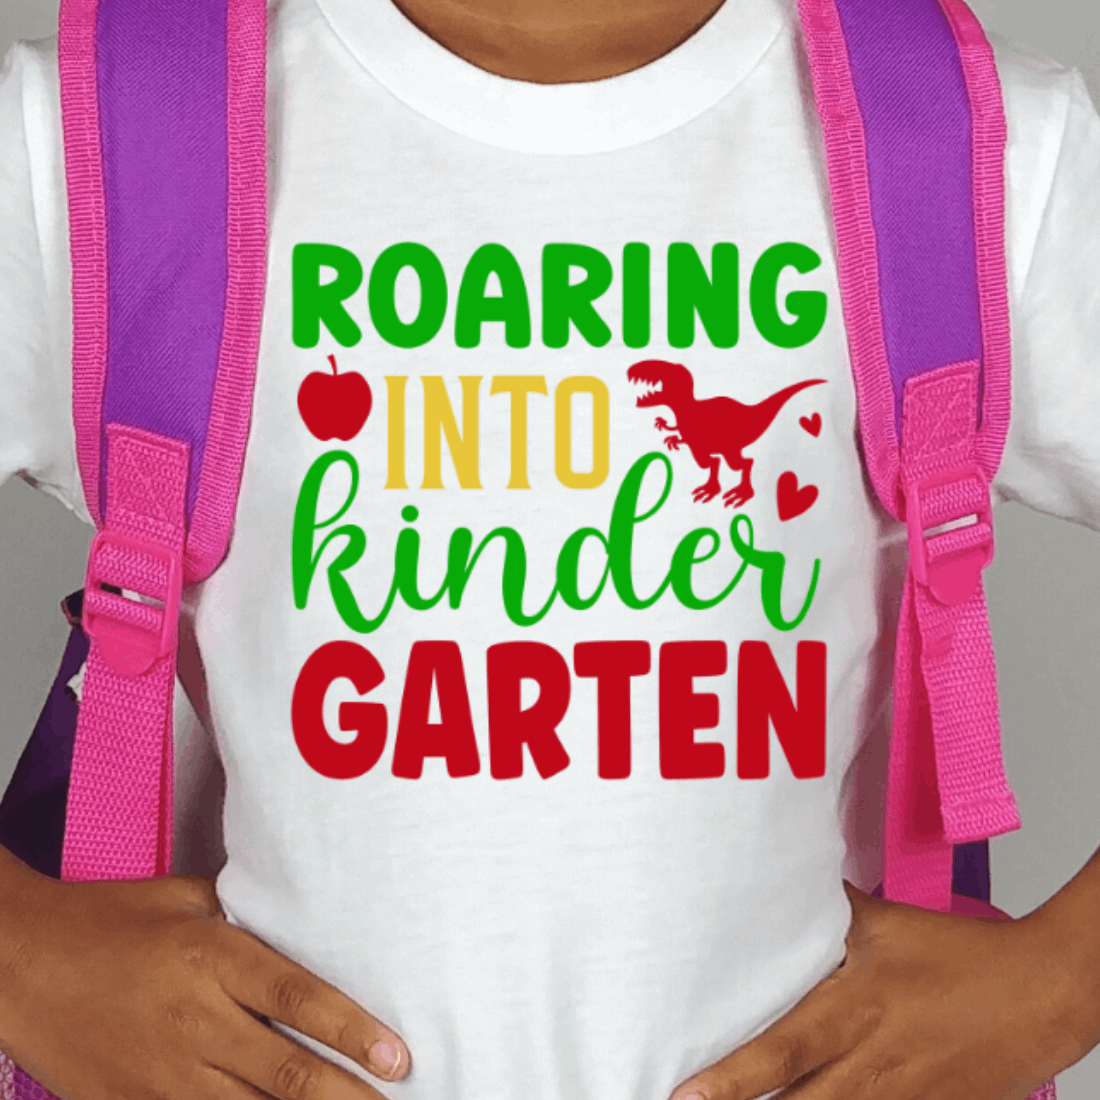 Child wearing a t - shirt that says roar into kinder garter.